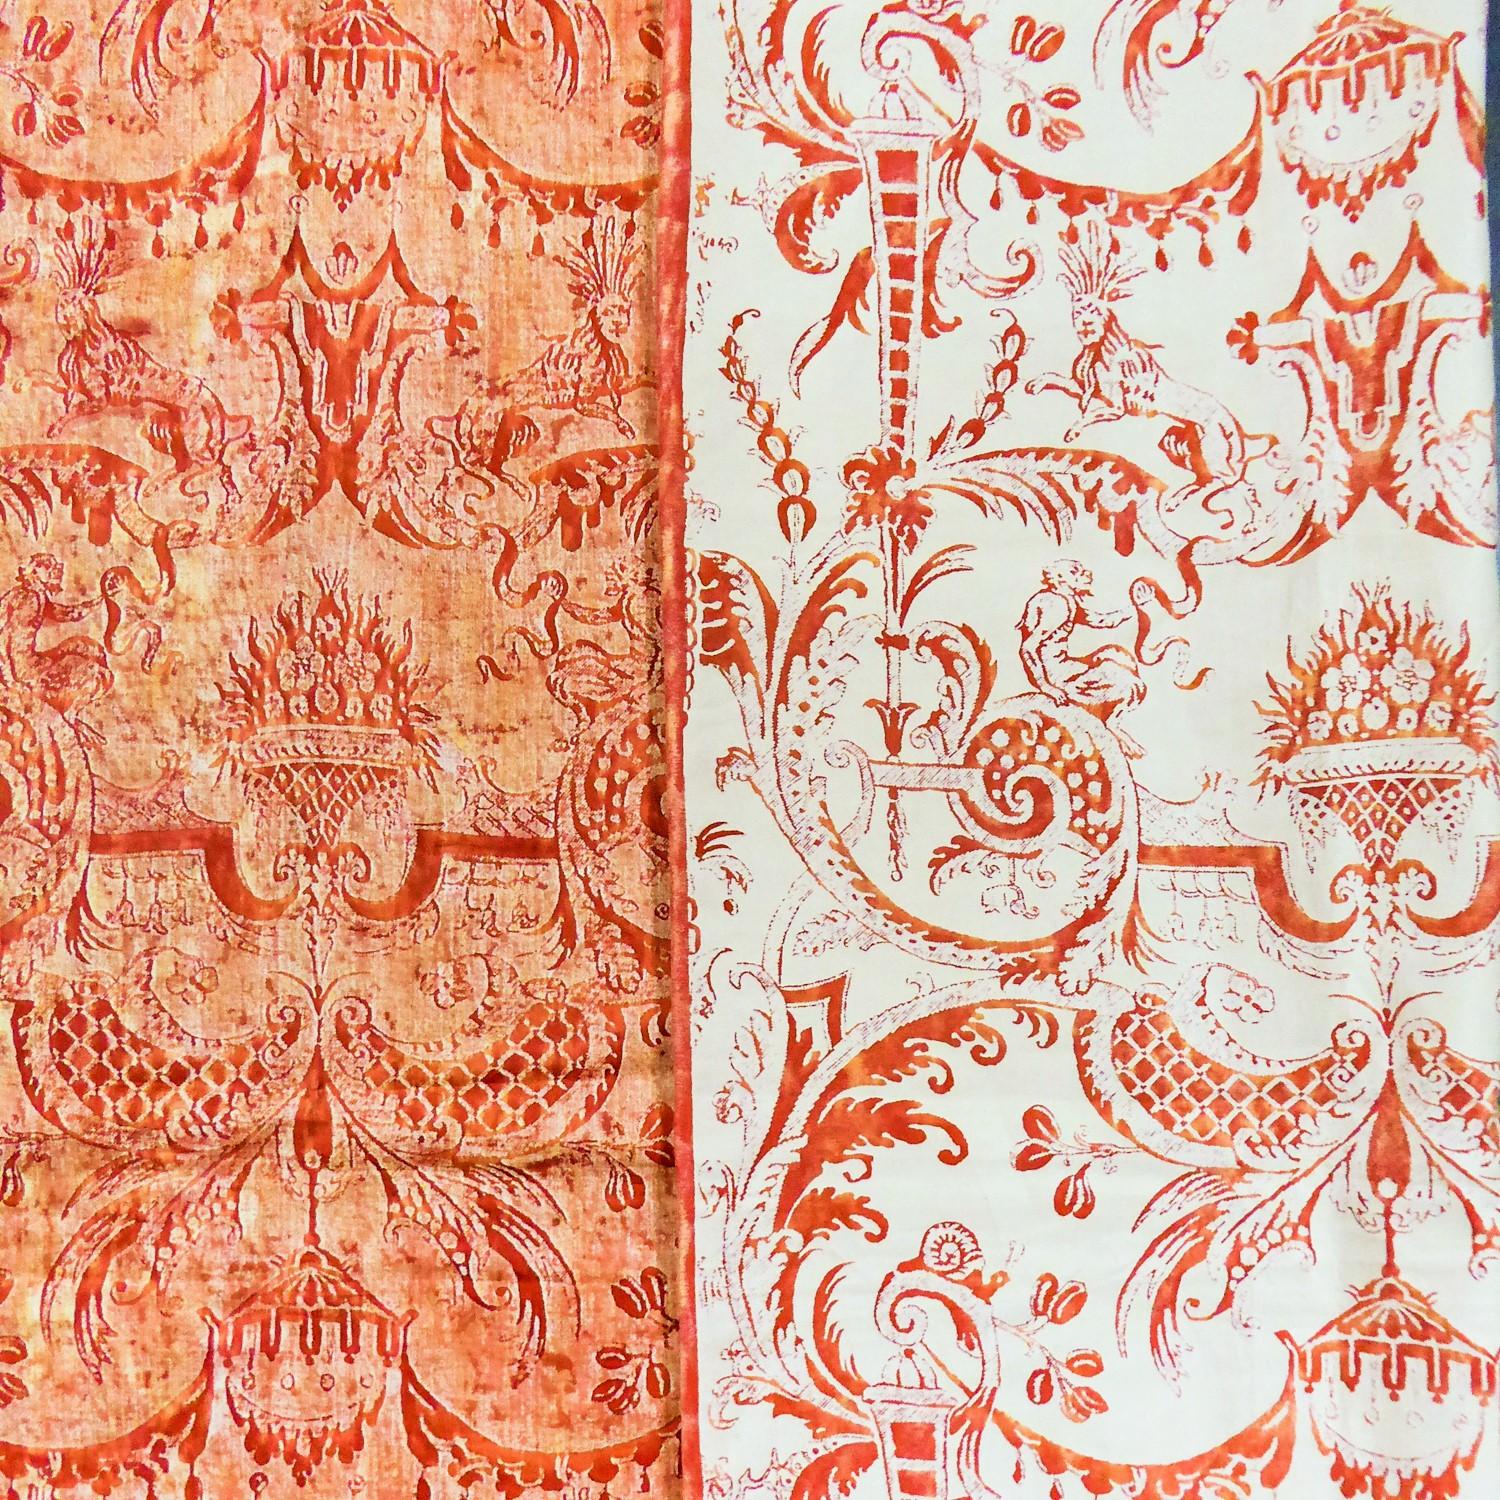 Circa 1980
Italy

Complete panel in 2.80 meters high in orange brick and cream reversible printed cotton by Mariano Fortuny in Venice around 1980. Organized decoration of Baroque inspiration with illuminations in ironworks dotted with grotesques and